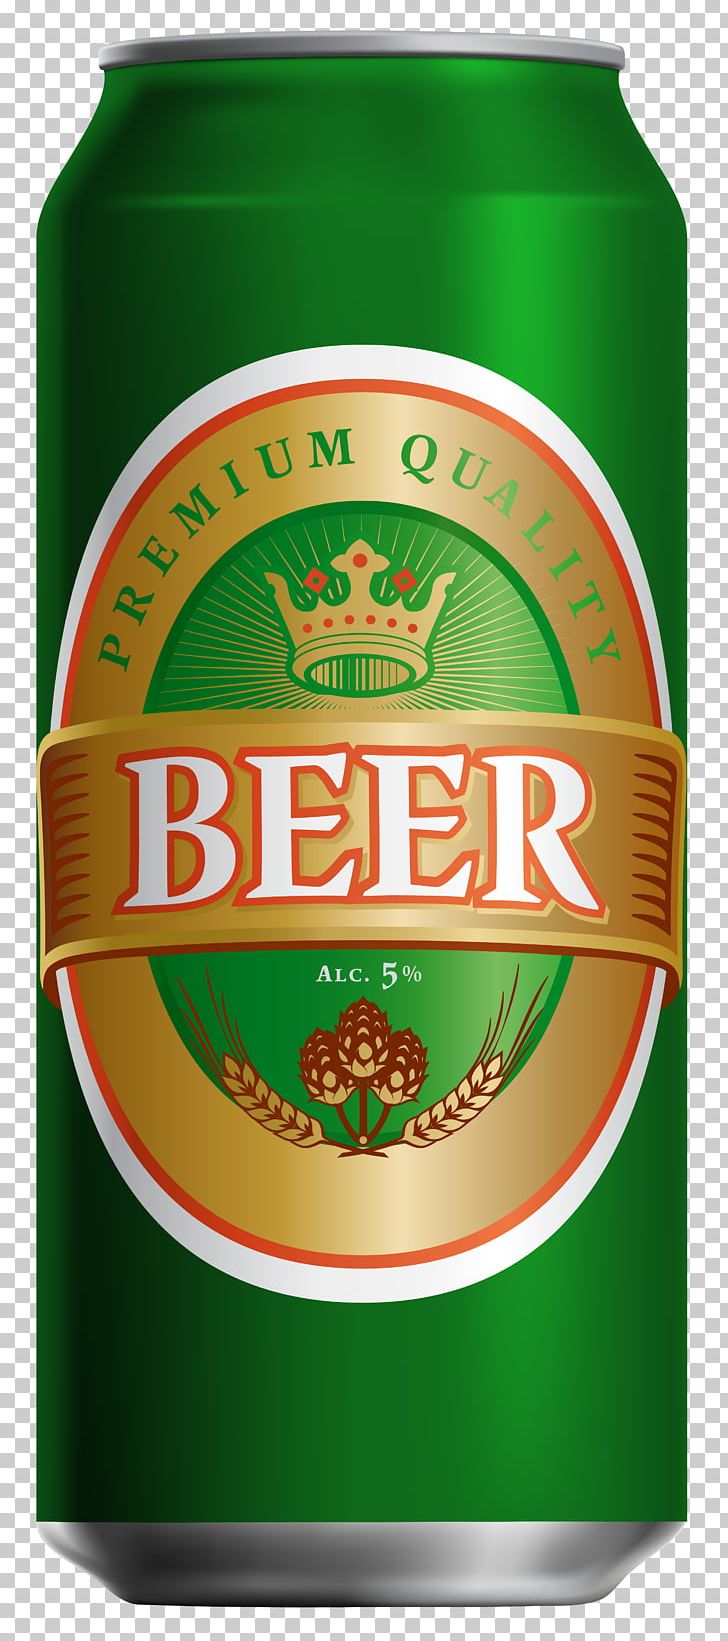 Beer Budweiser India Pale Ale Lager PNG, Clipart, Alcoholic Drink, Becks Brewery, Beer, Beer Bottle, Beer Can Free PNG Download